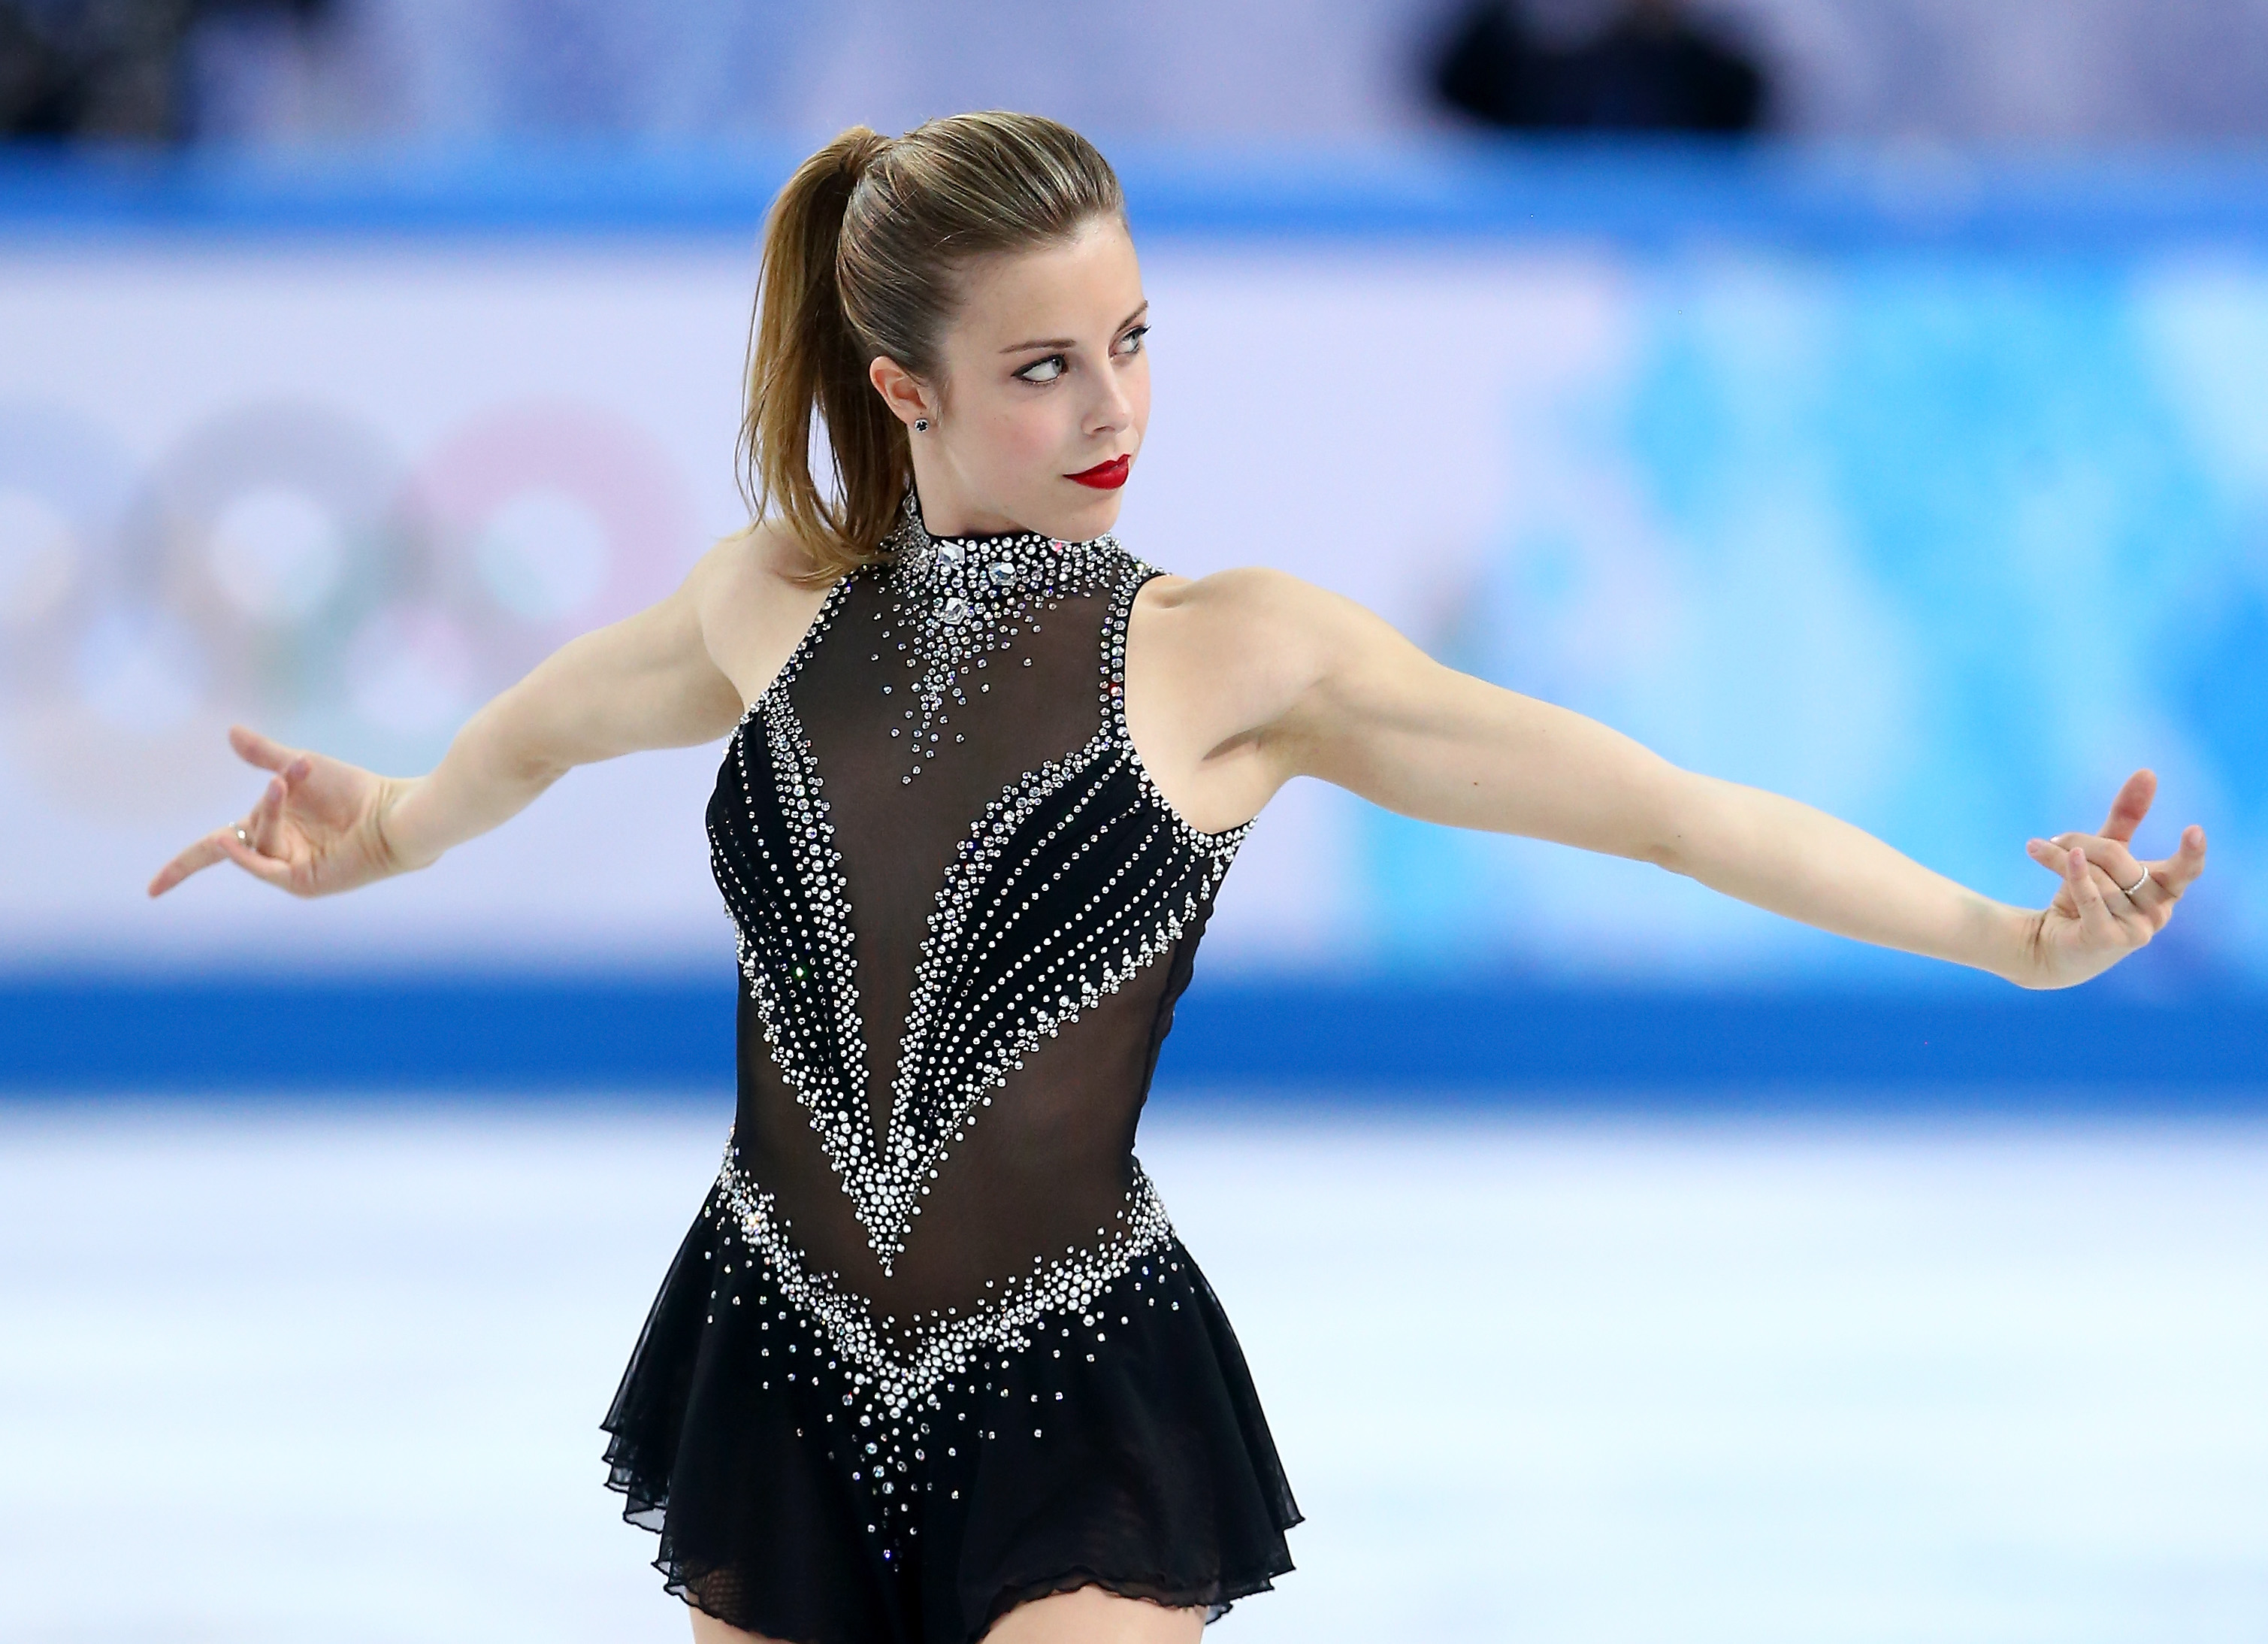 Ashley Wagner competes in the Figure Skating Team Ladies Short Program during day one of the Sochi 2014 Winter Olympics at Iceberg Skating Palace on February 8, 2014 in Sochi, Russia. (Streeter Lecka / Getty Images)